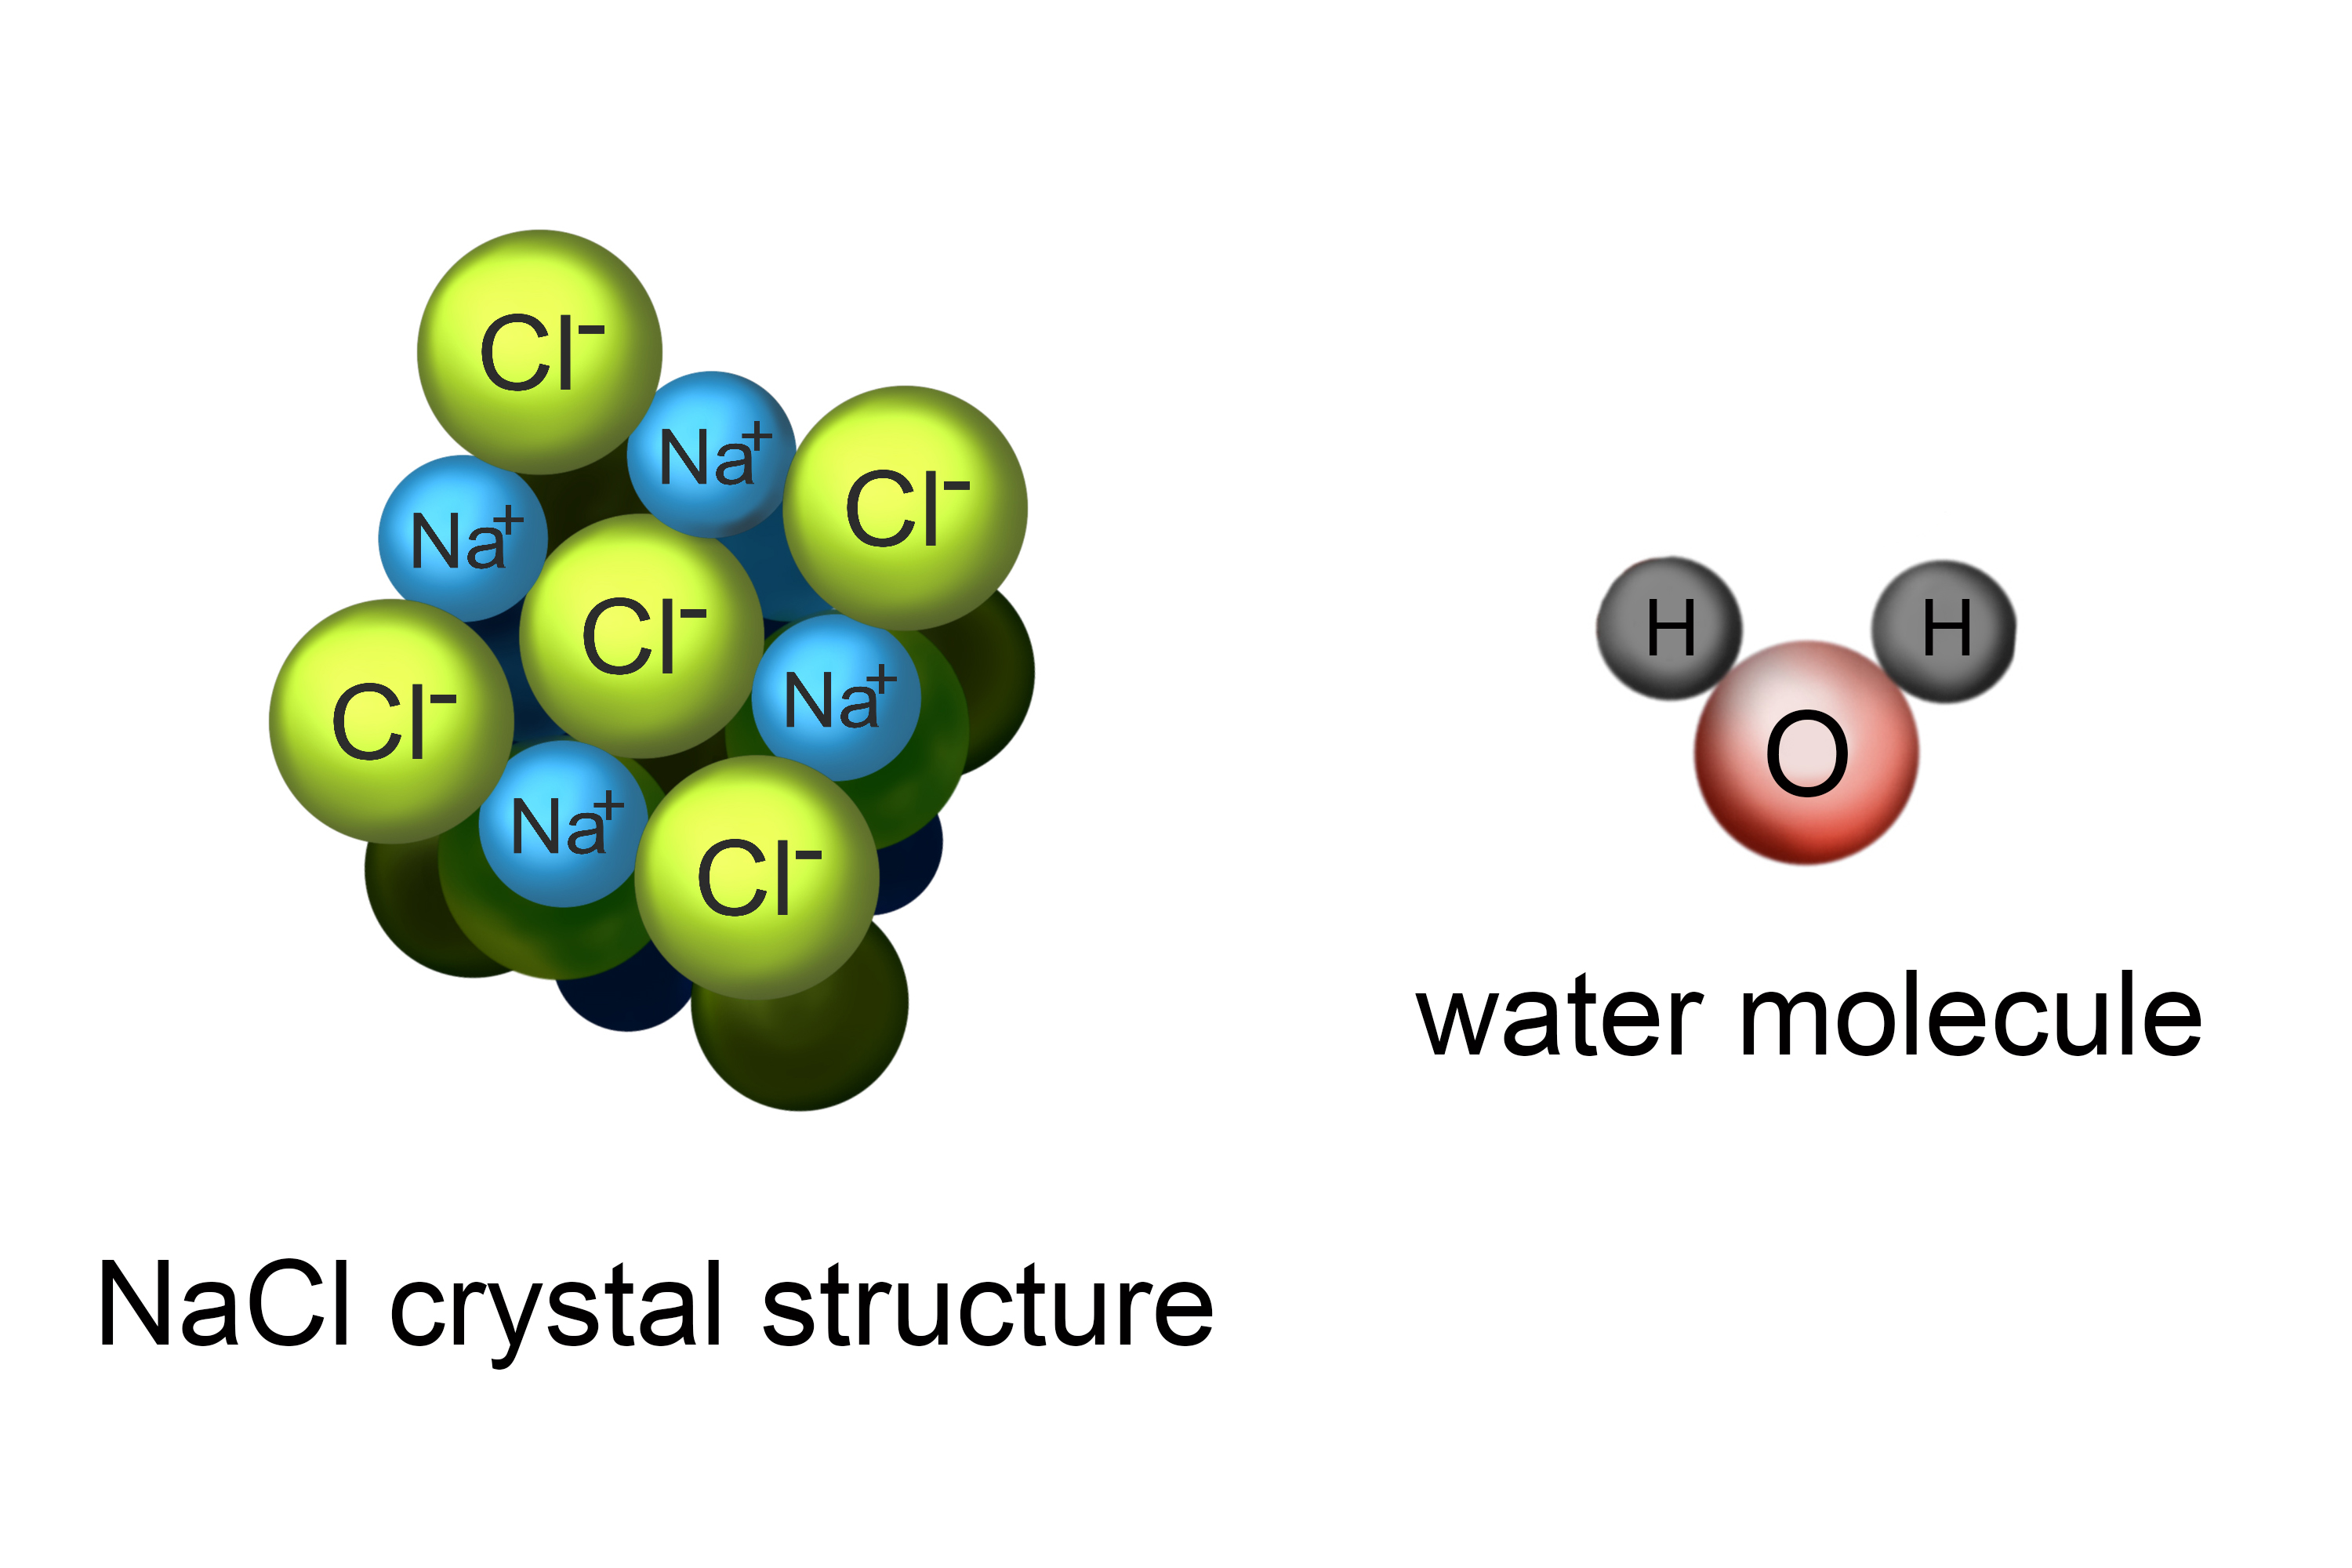 Structure of particles in a NaCI crystal molecule including water molecule 